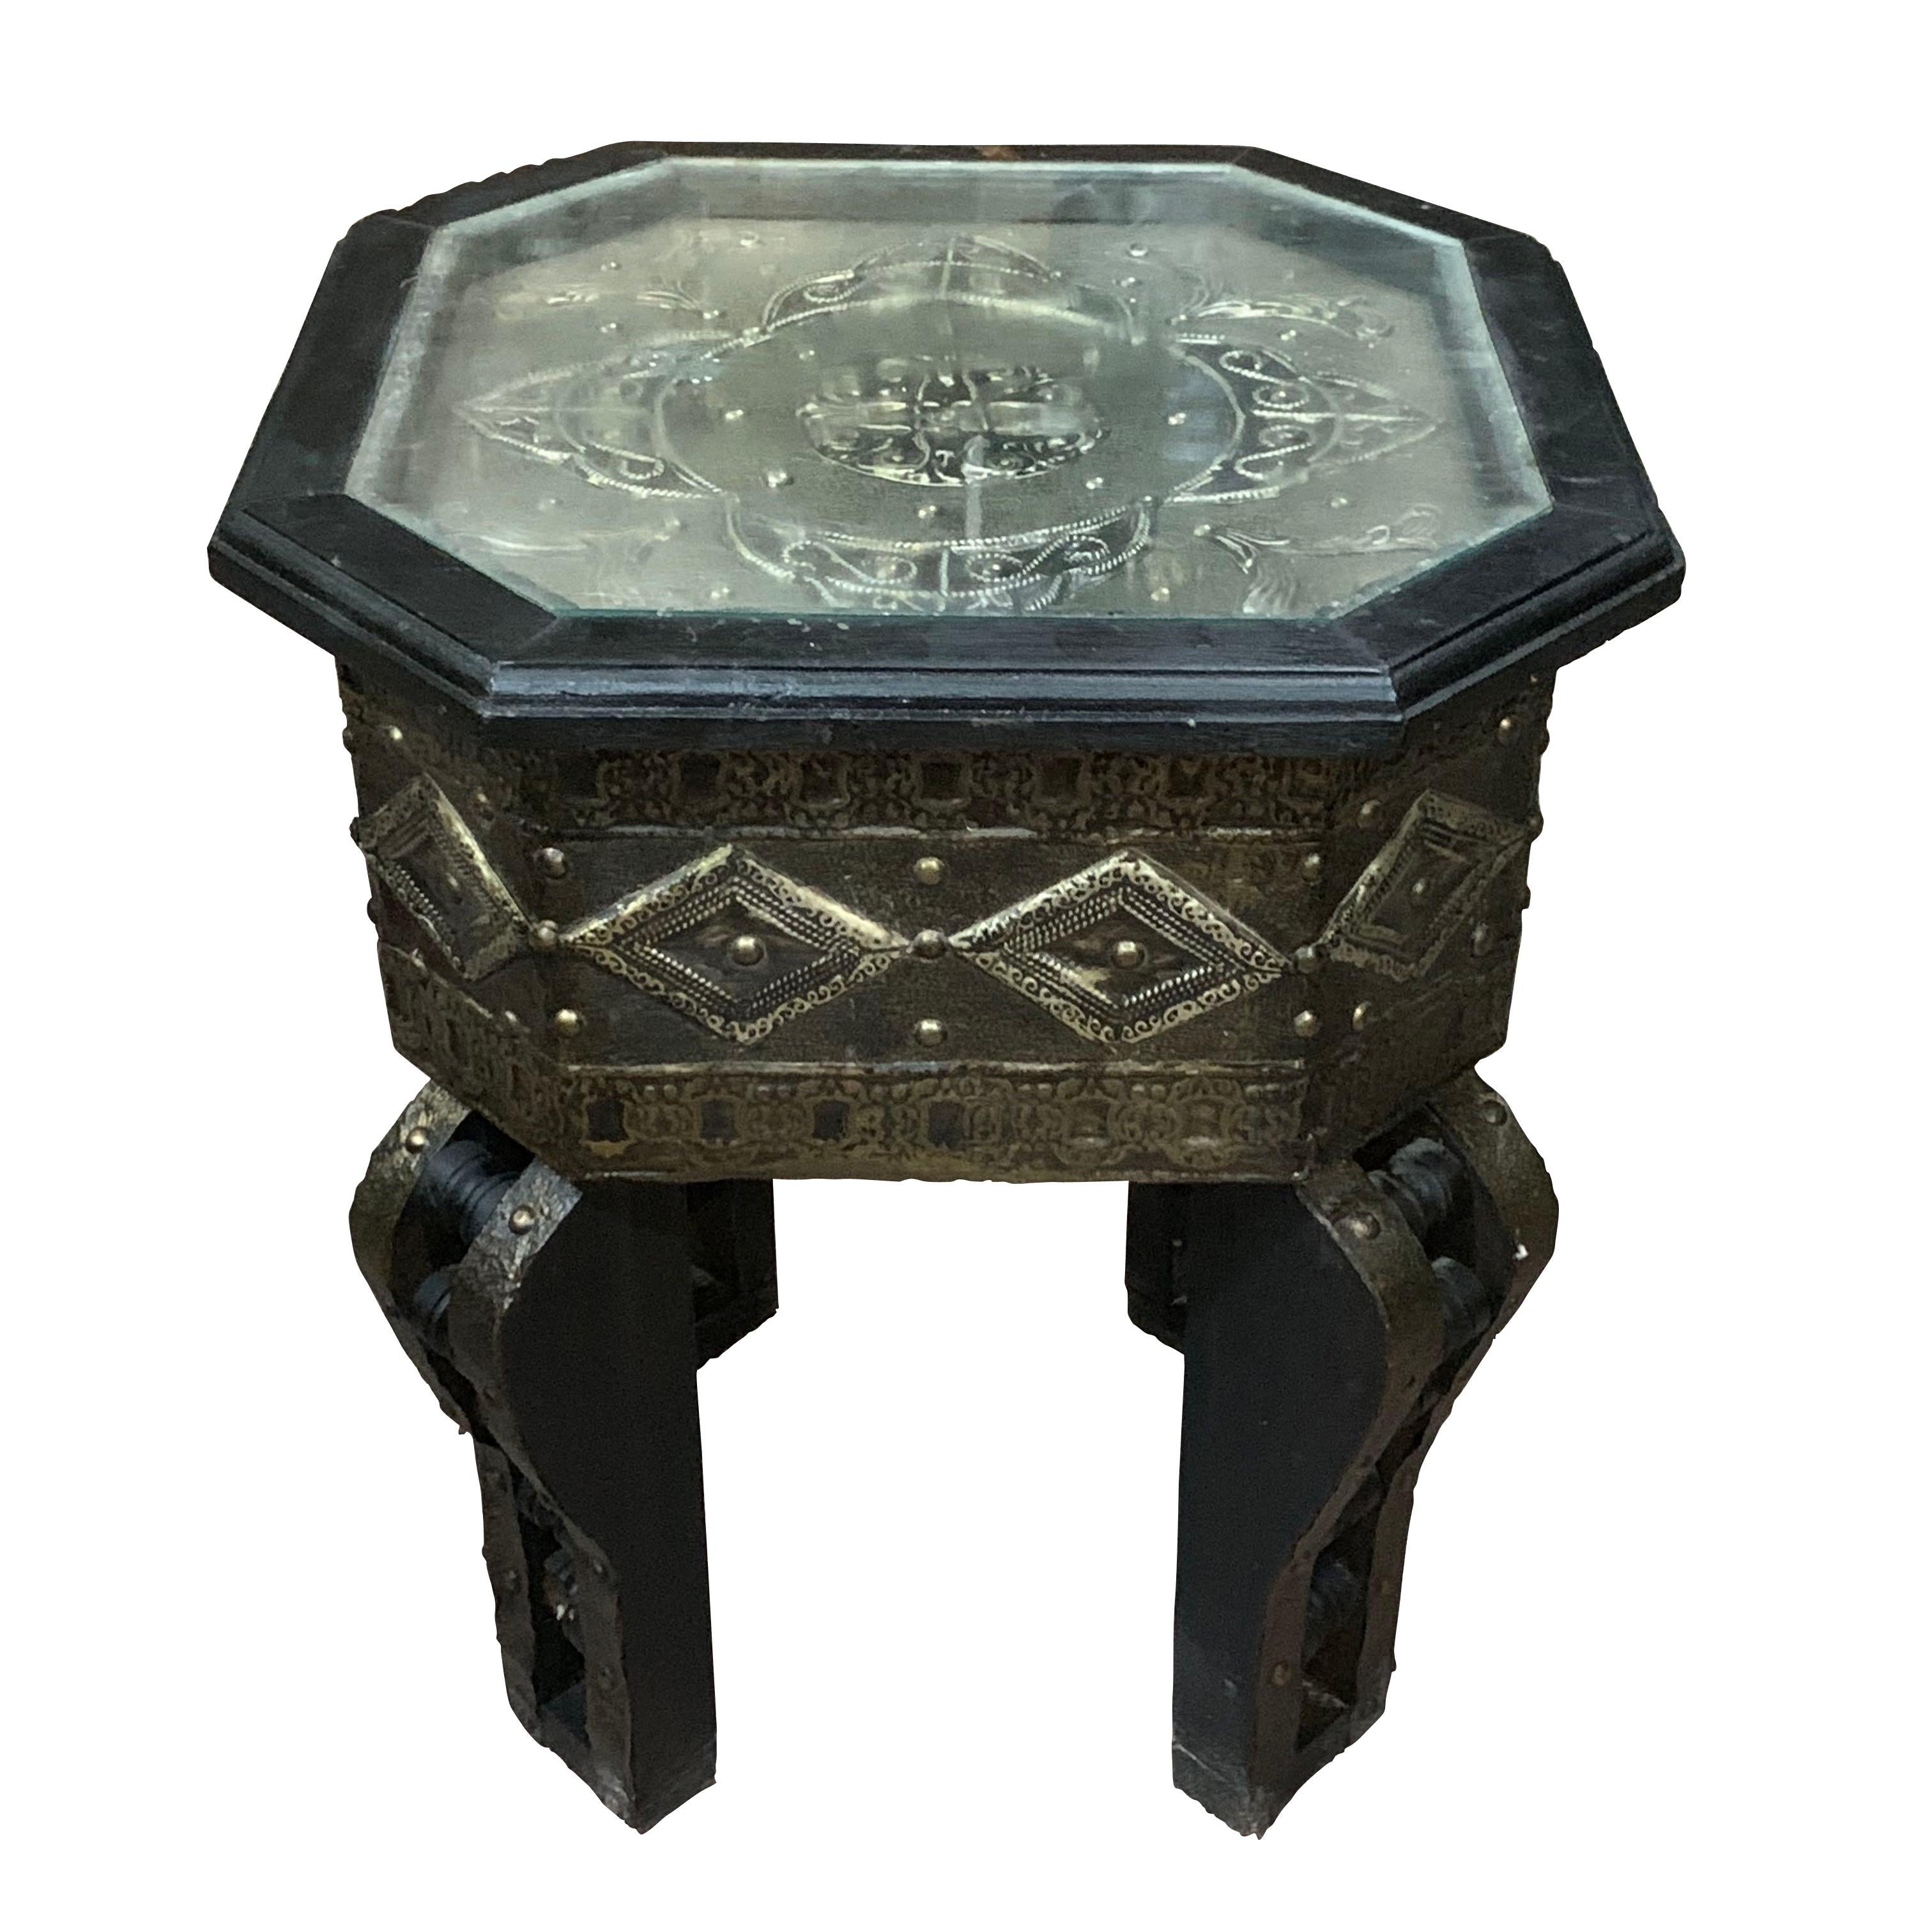 19th century Morocco from the Sahara region, the top and sides of this octagonal shape cedarwood cocktail table has decorative brass and inlaid silver details. 
The decorative top is protected by glass.

